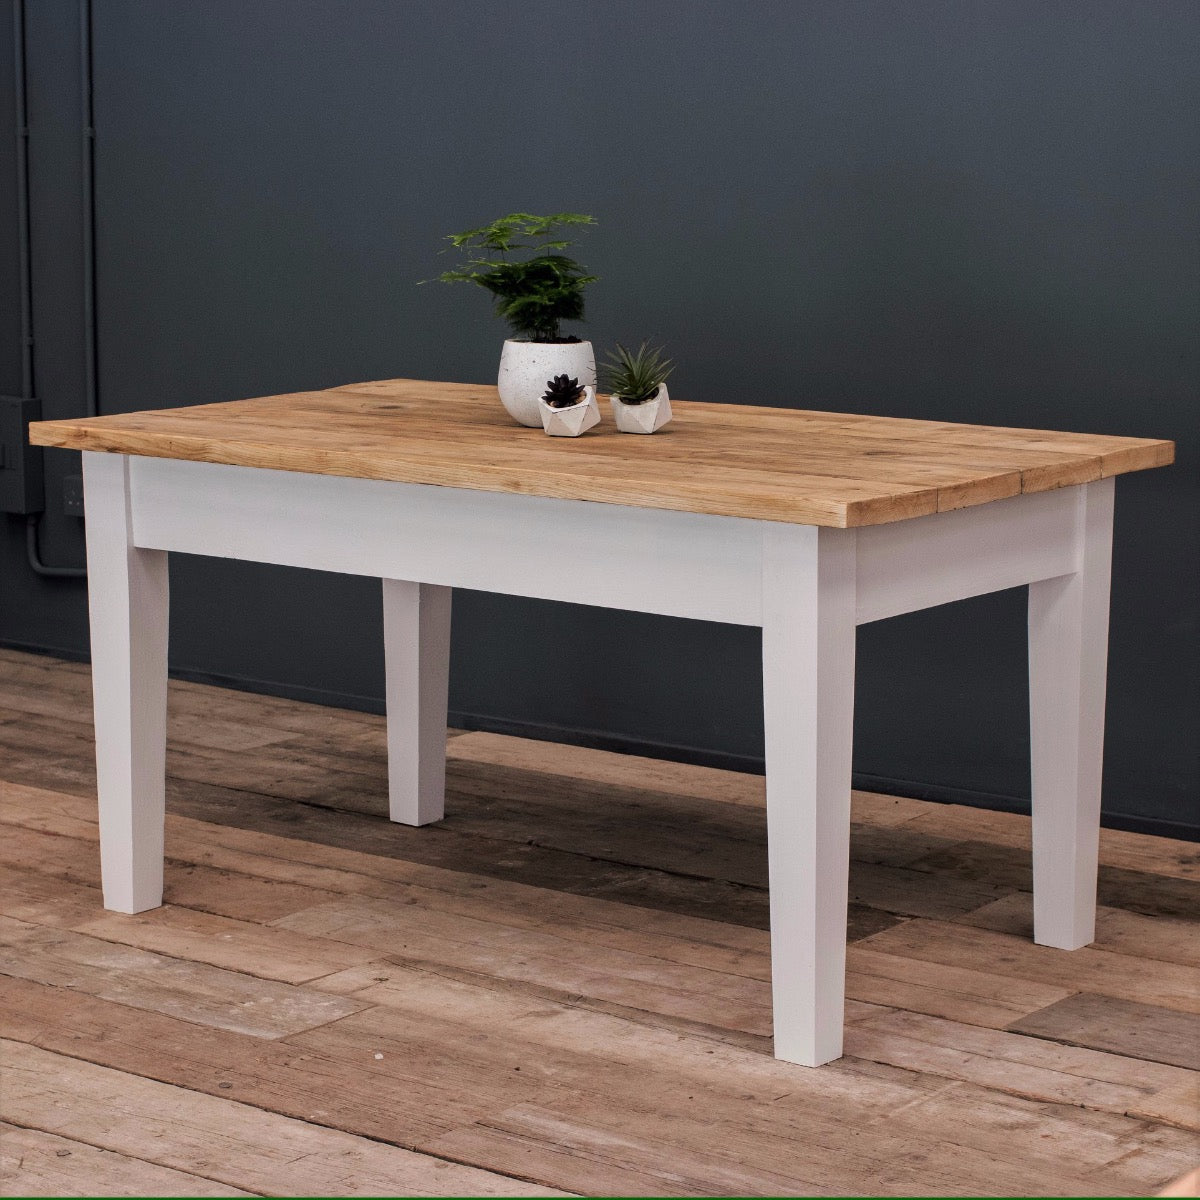 5ft Oak Farmhouse Kitchen Table with Tapered Legs